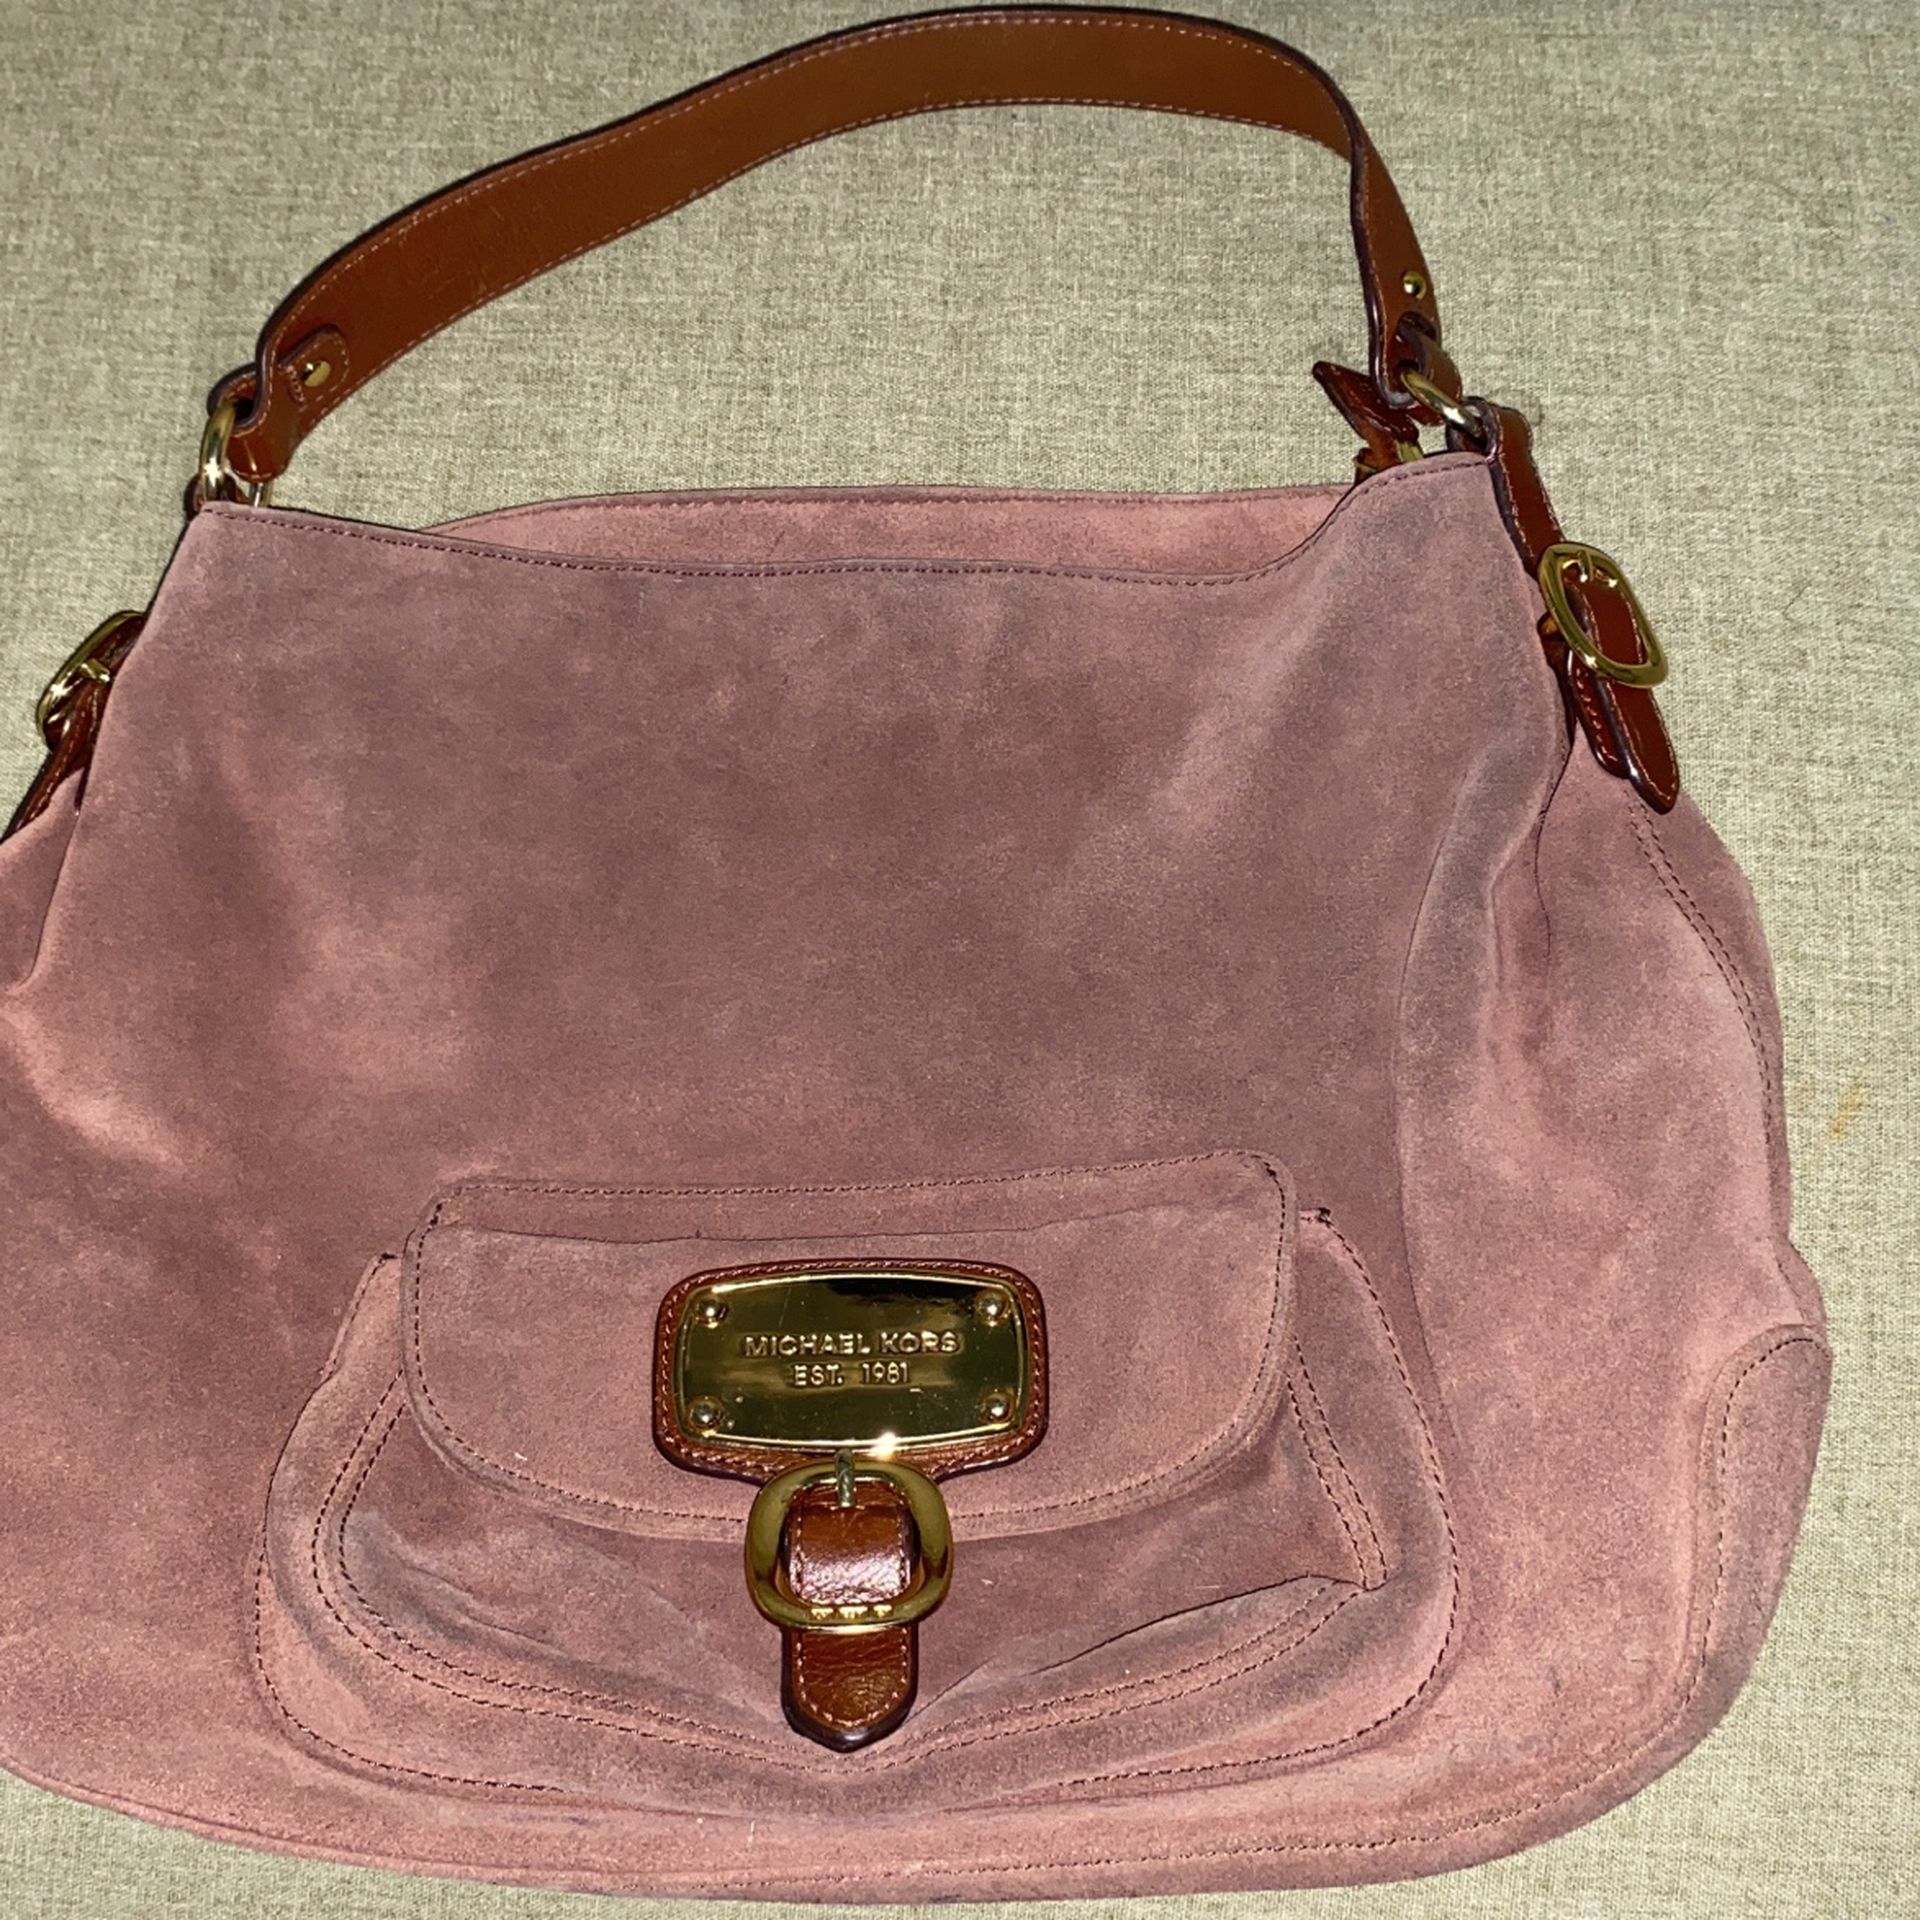 Michael Kors Brown Suede Hobo Bag Purse Used Great Condition